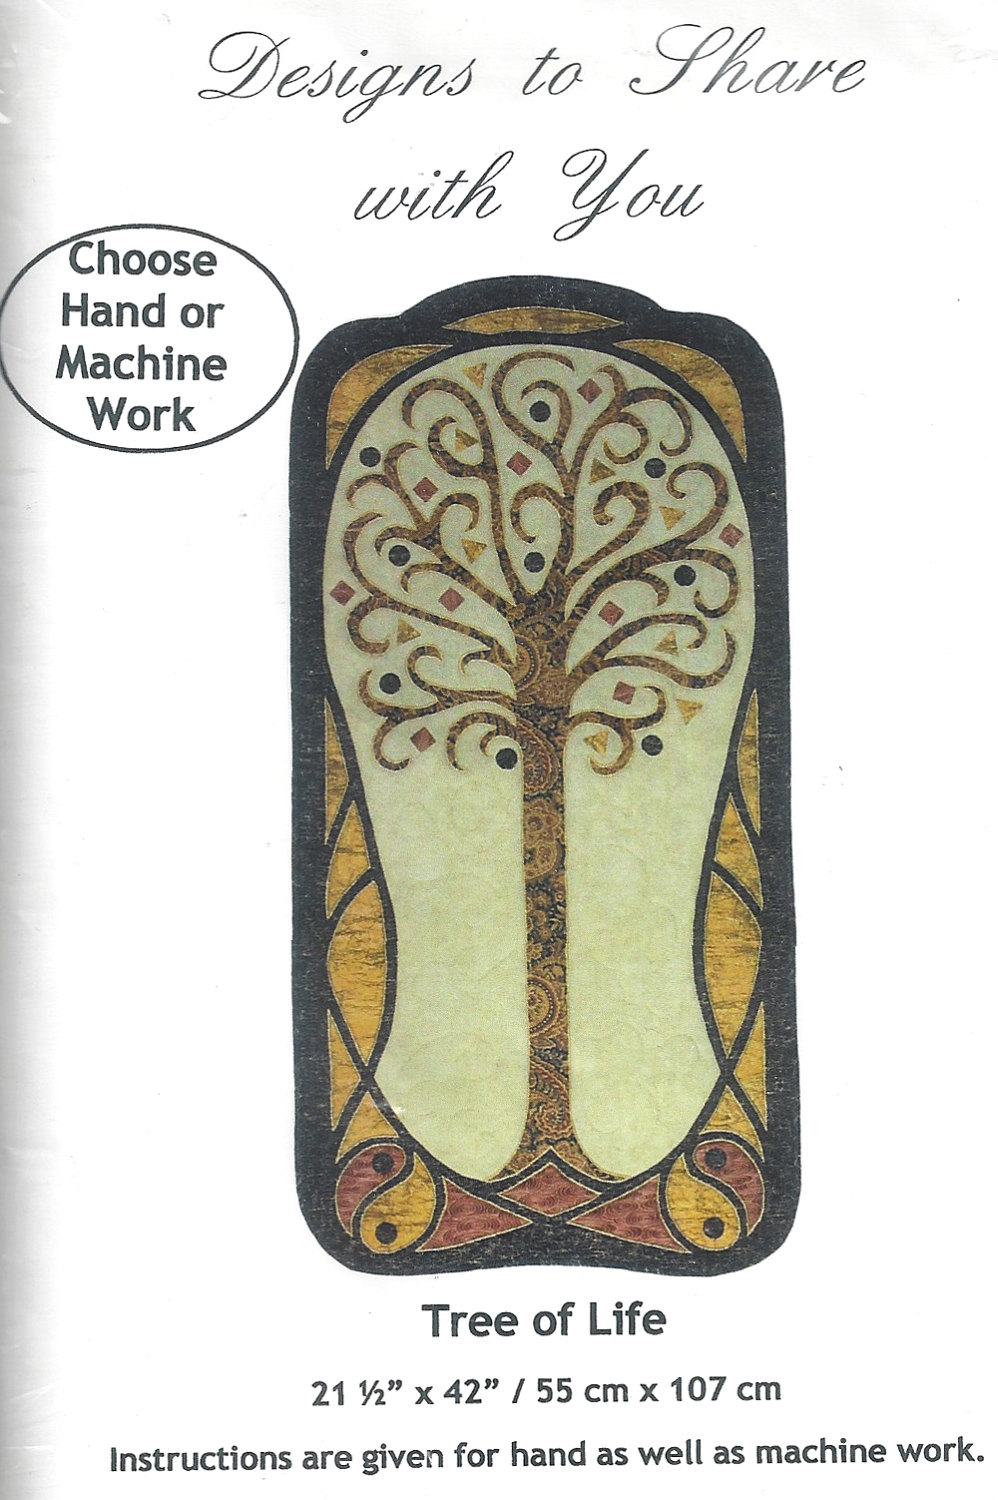 Tree Of Life Embroidery Pattern Tree Of Life Embroidery Pattern Hand Or Machine Religious Symbolsstained Glass Image Designs To Share With You Metallicgold Thread